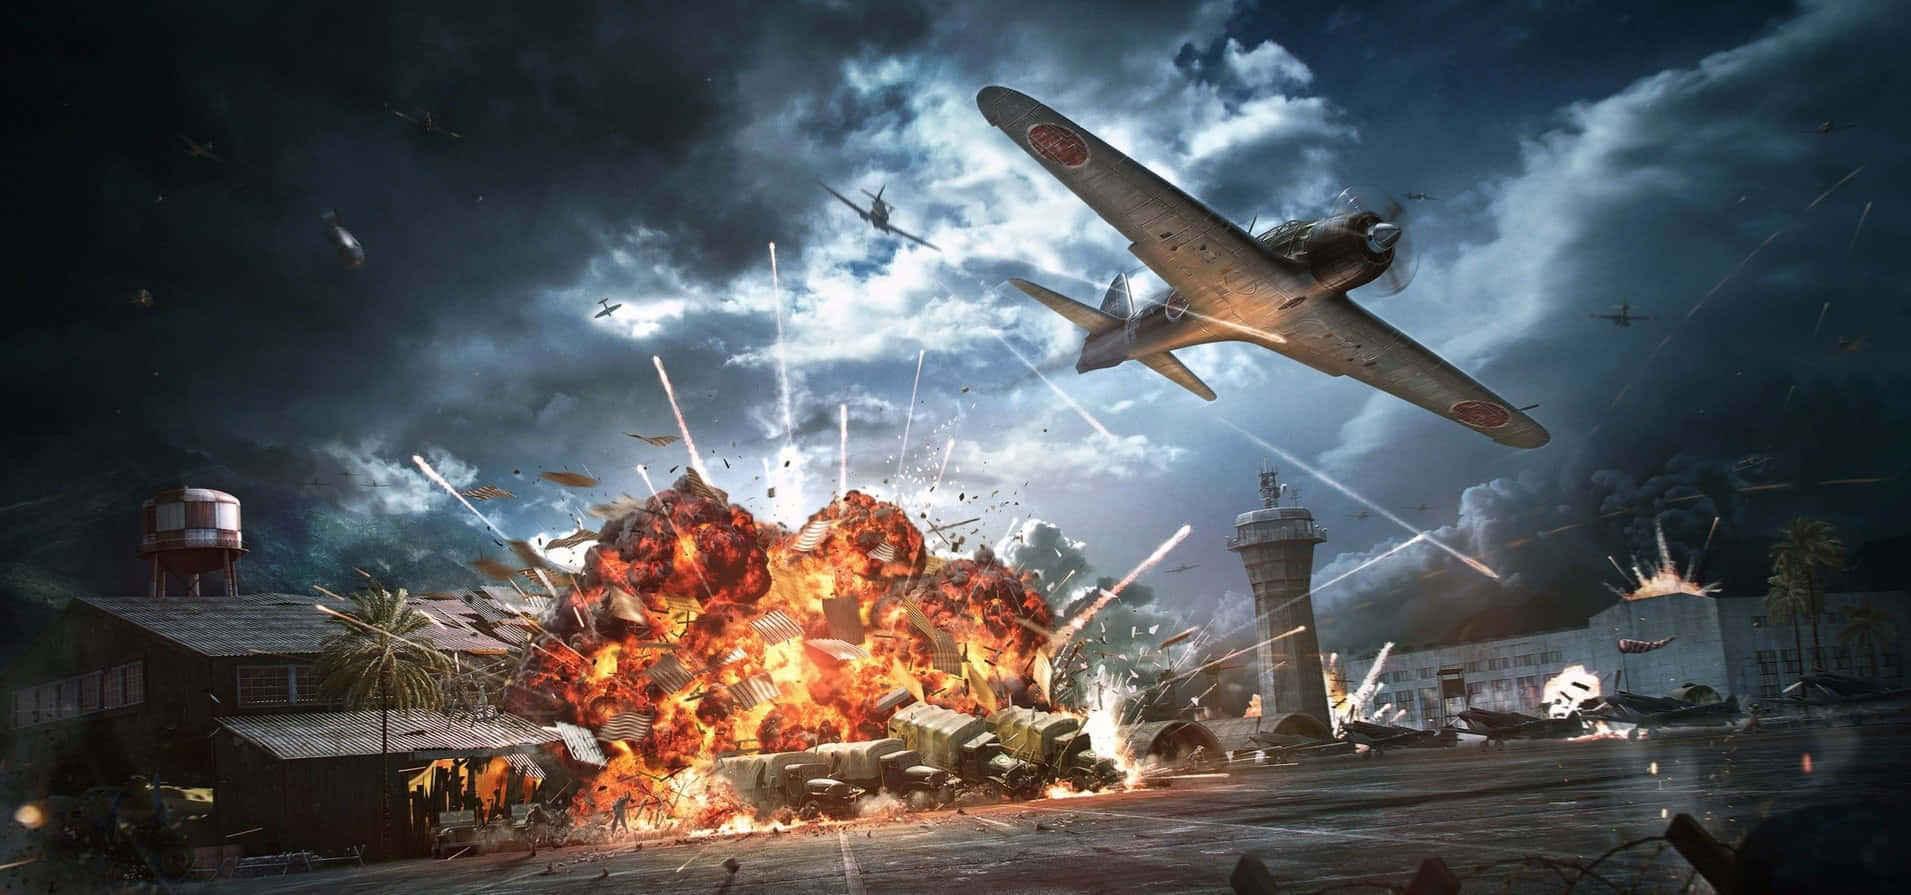 Military Aircraft Bomb Explosion Background